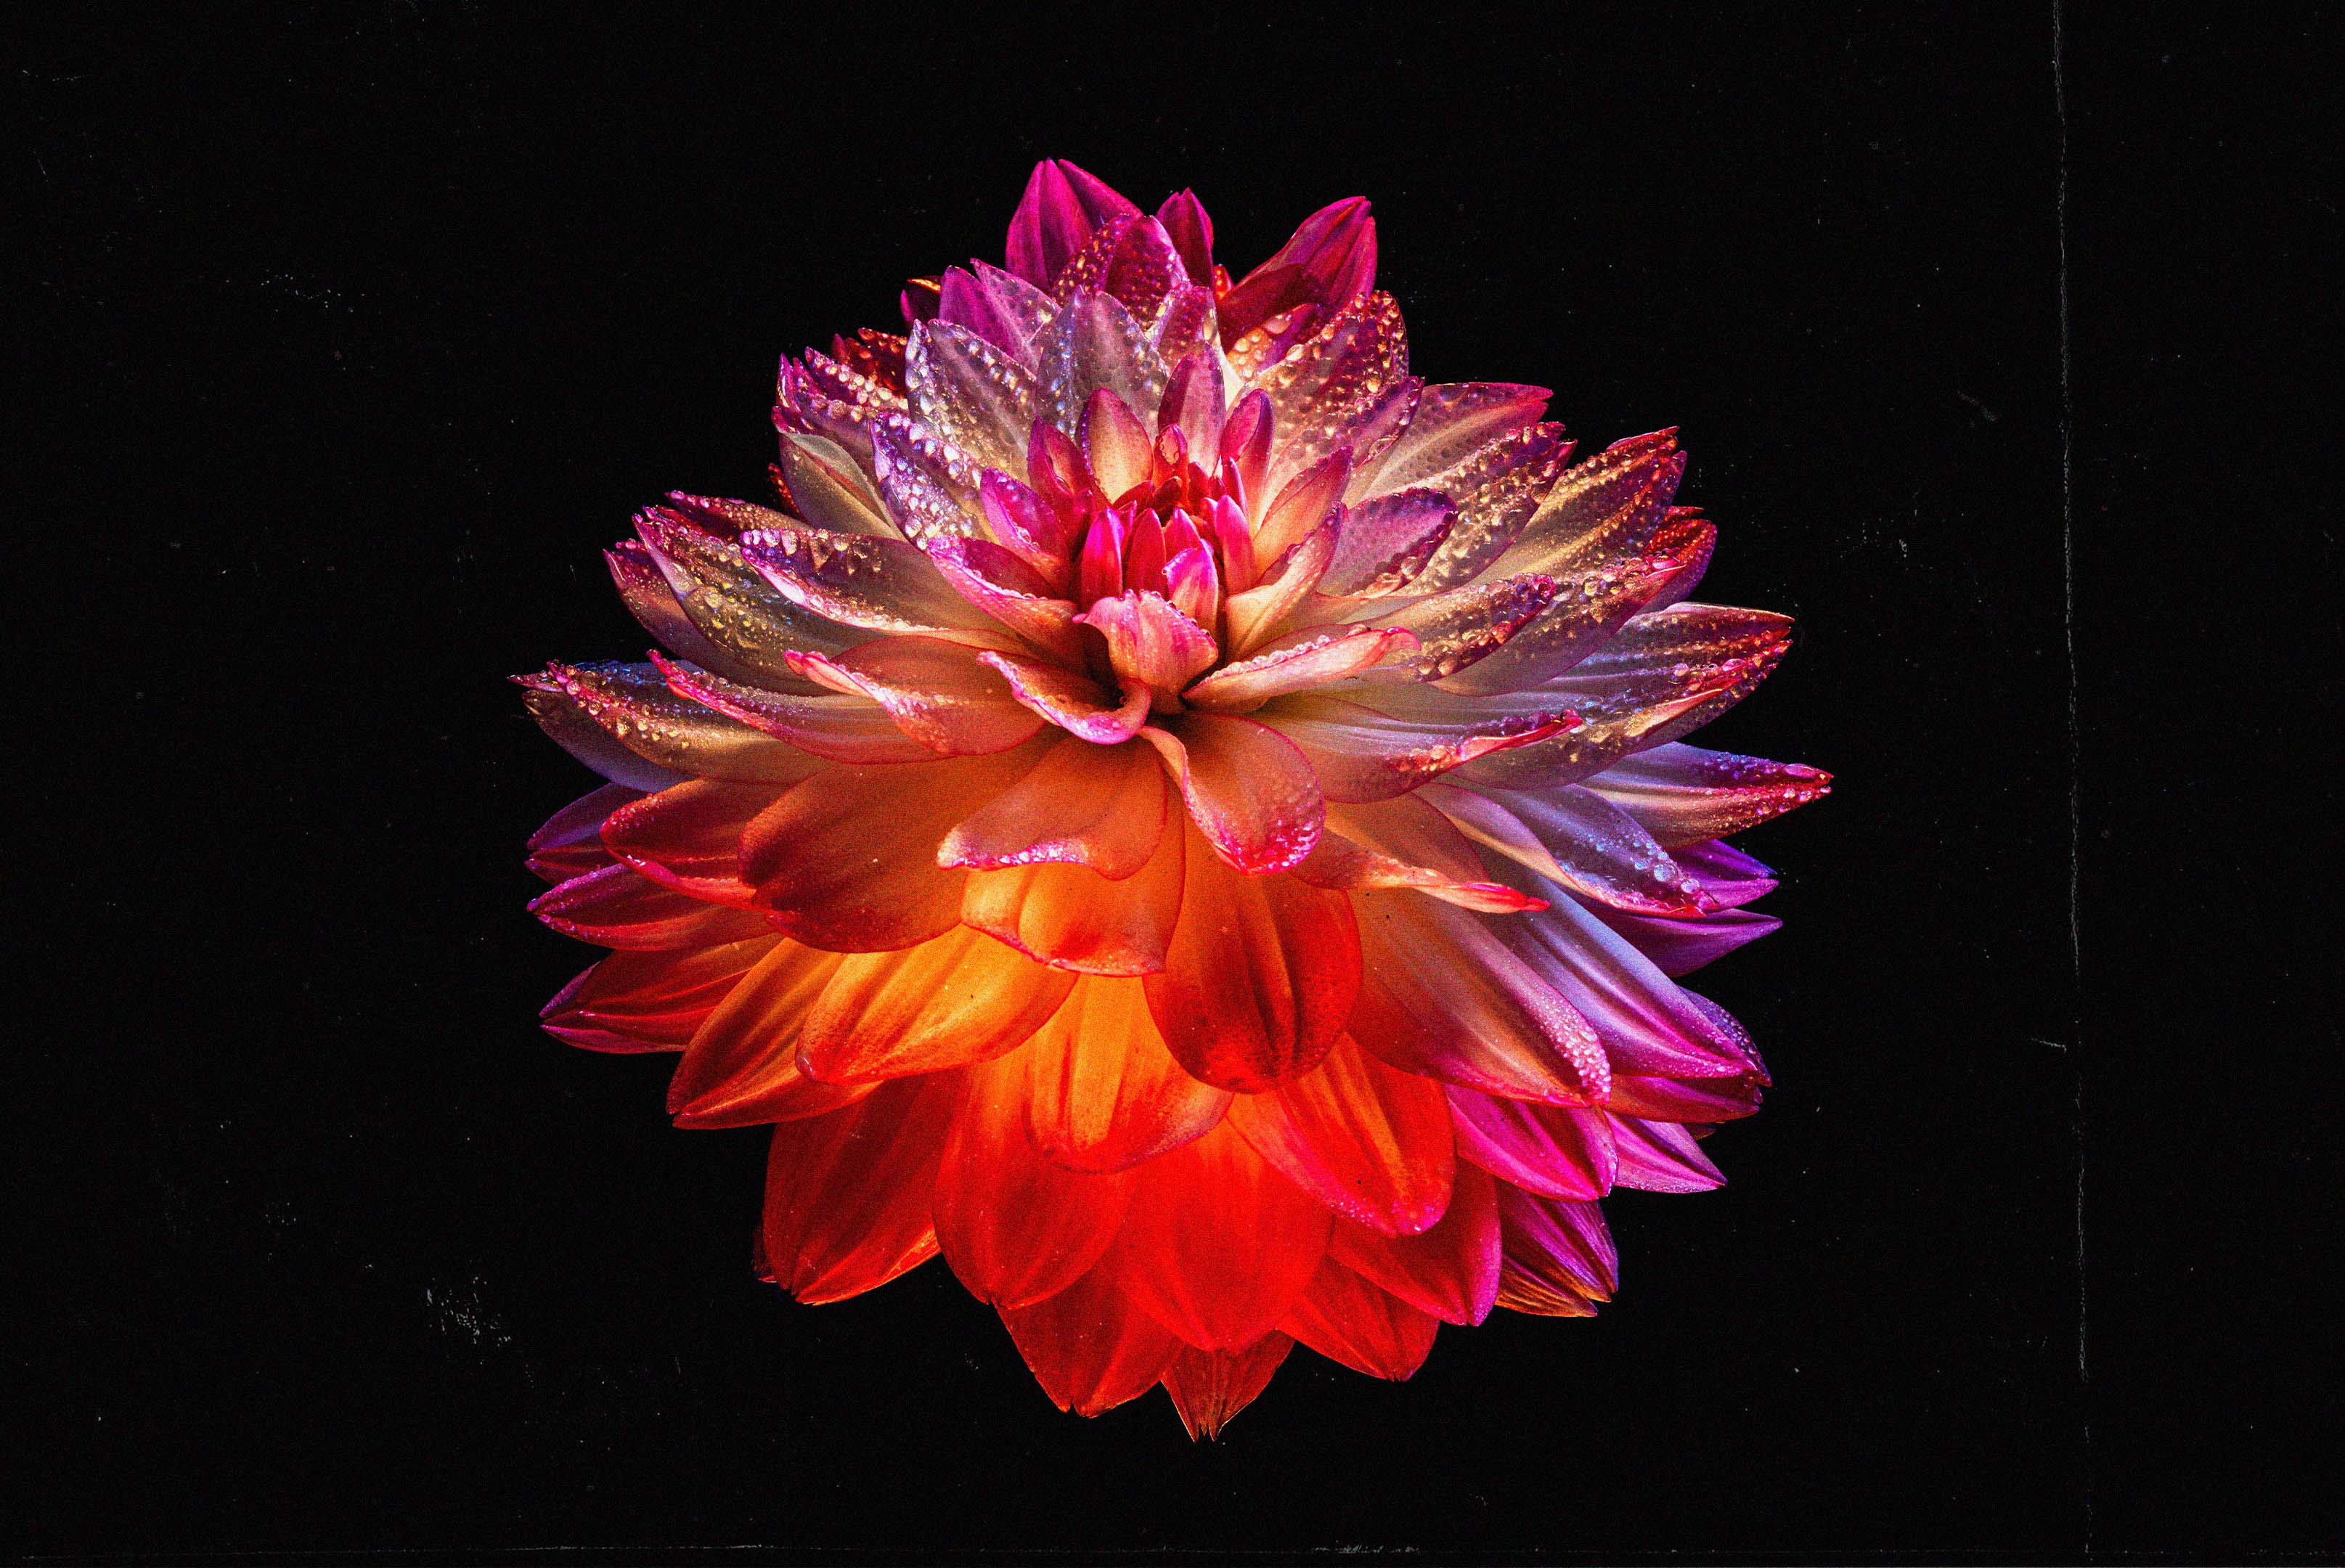 Chris Corsini and the Collective are blooming like this beautiful red Dahlia flower on black background.